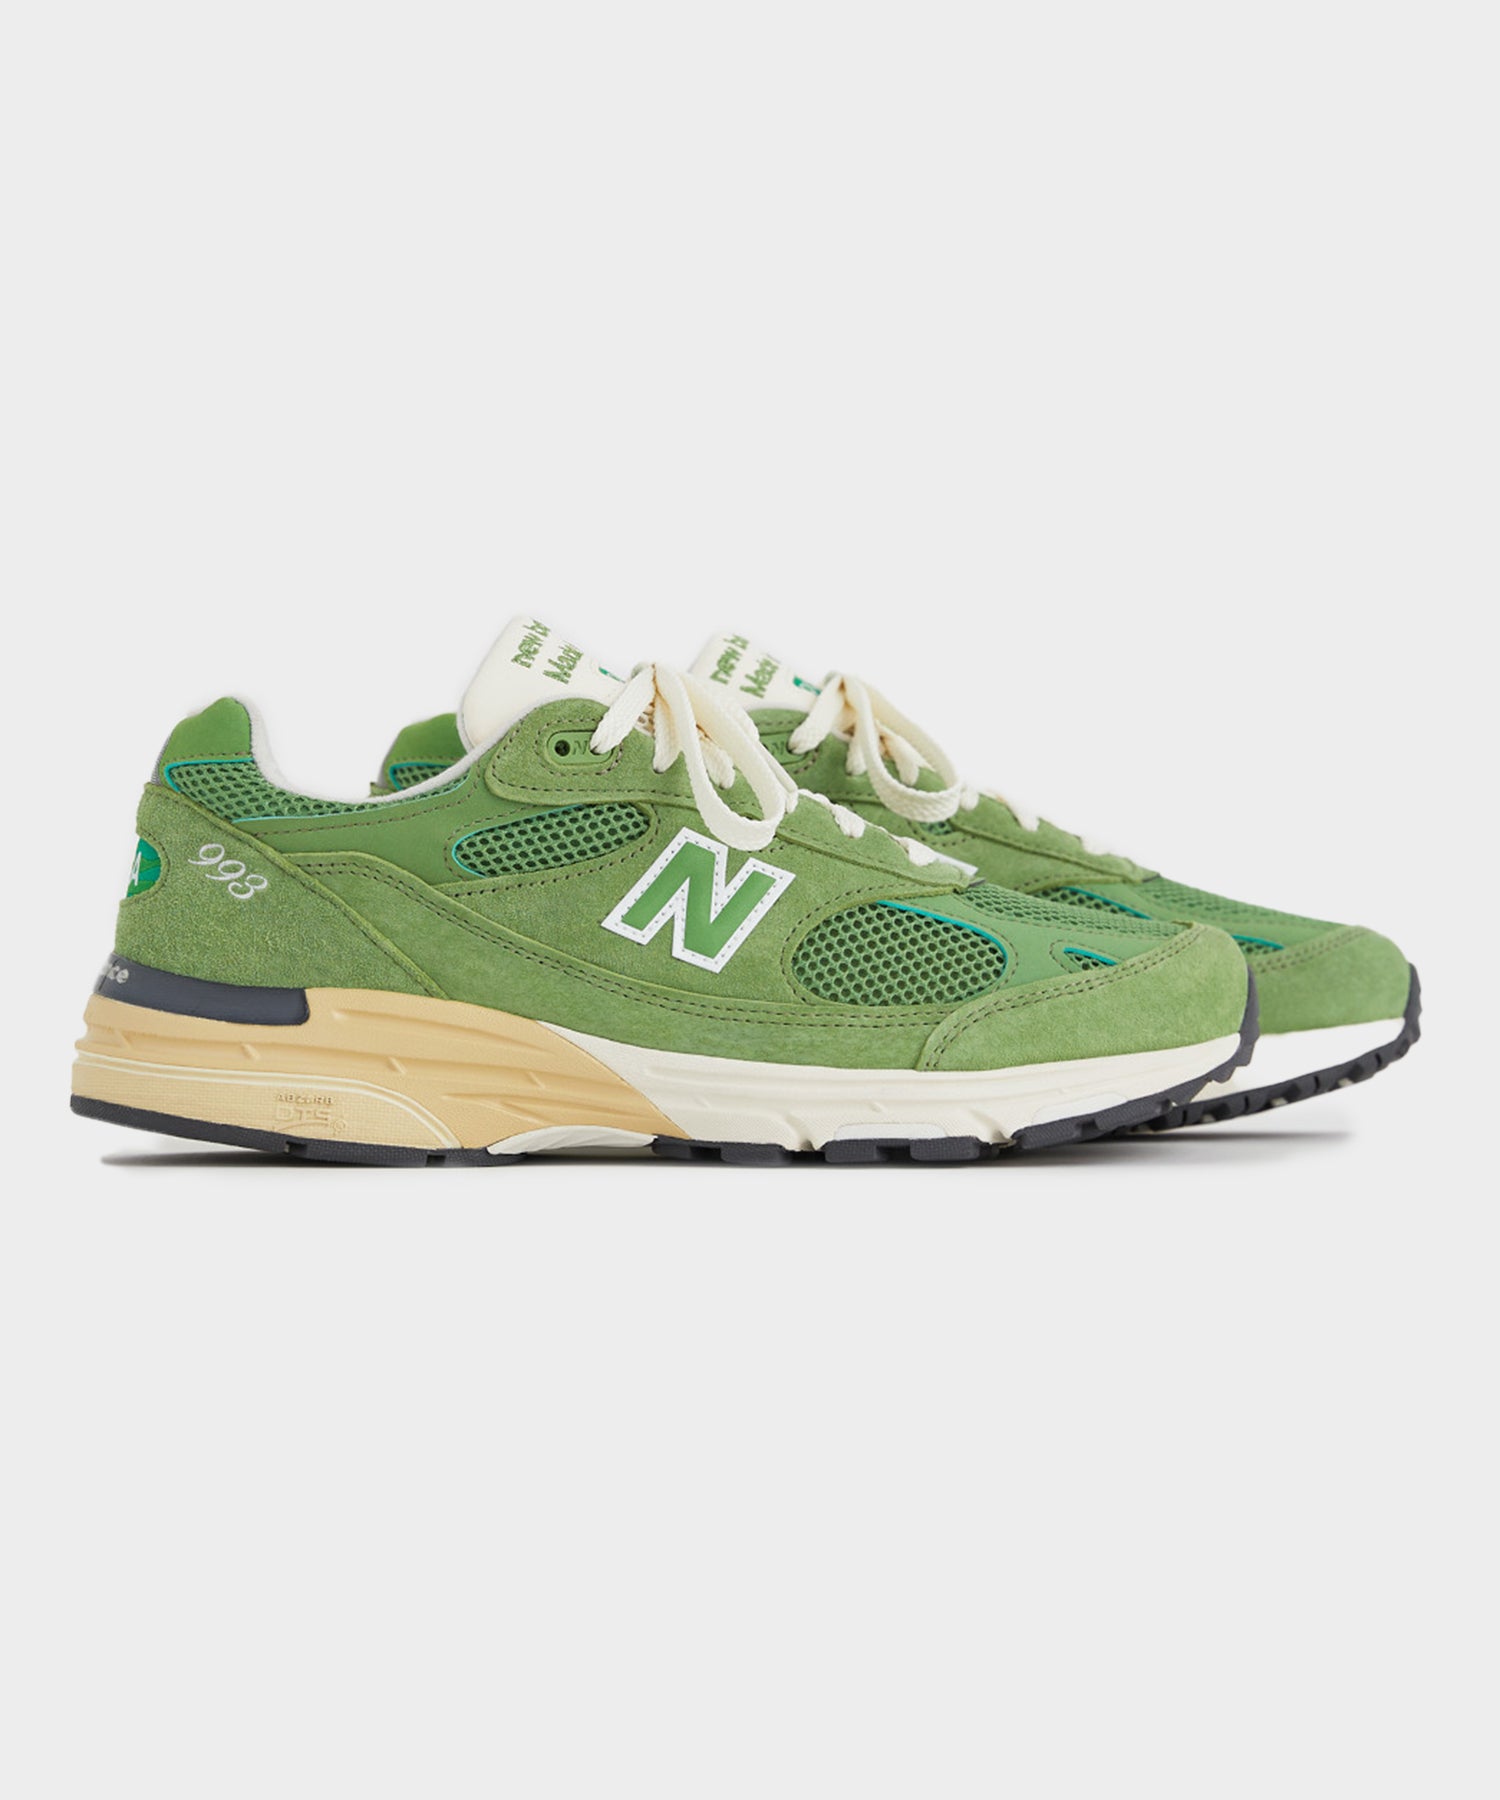 New Balance Made in USA 993 Chive Green